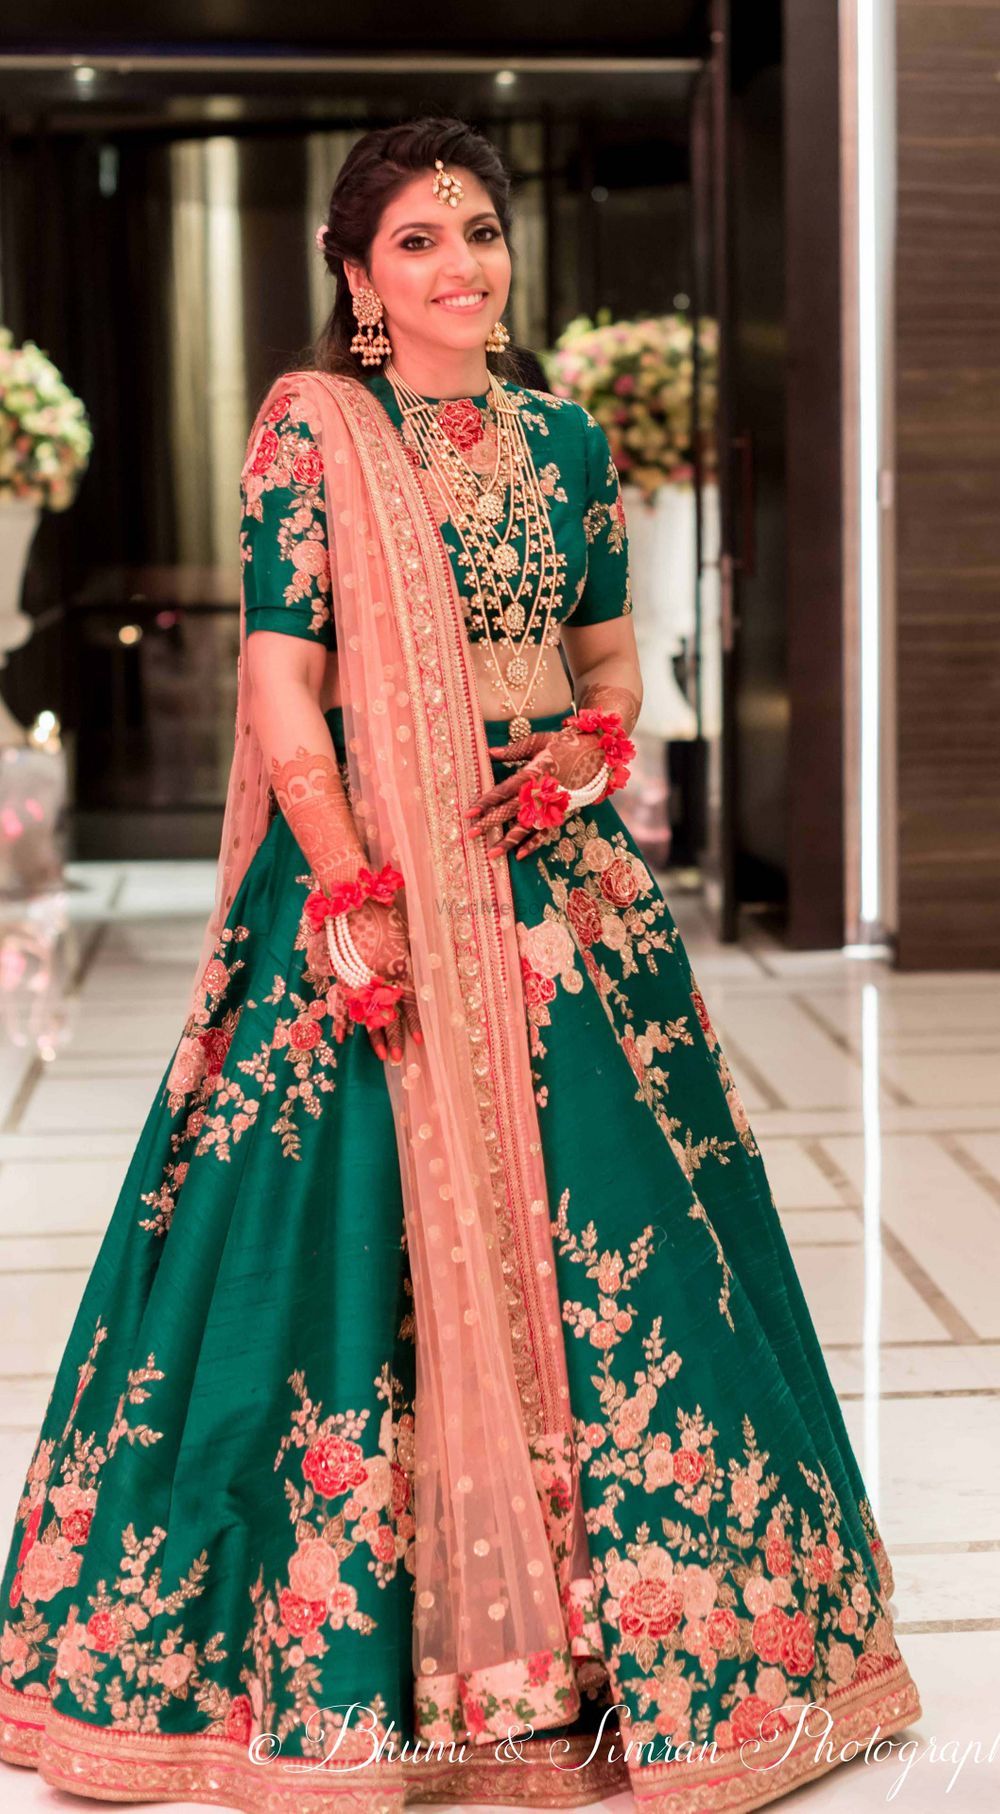 Photo of red and green lehenga | Indian bridal wear, Bridal lehenga choli,  Indian bride